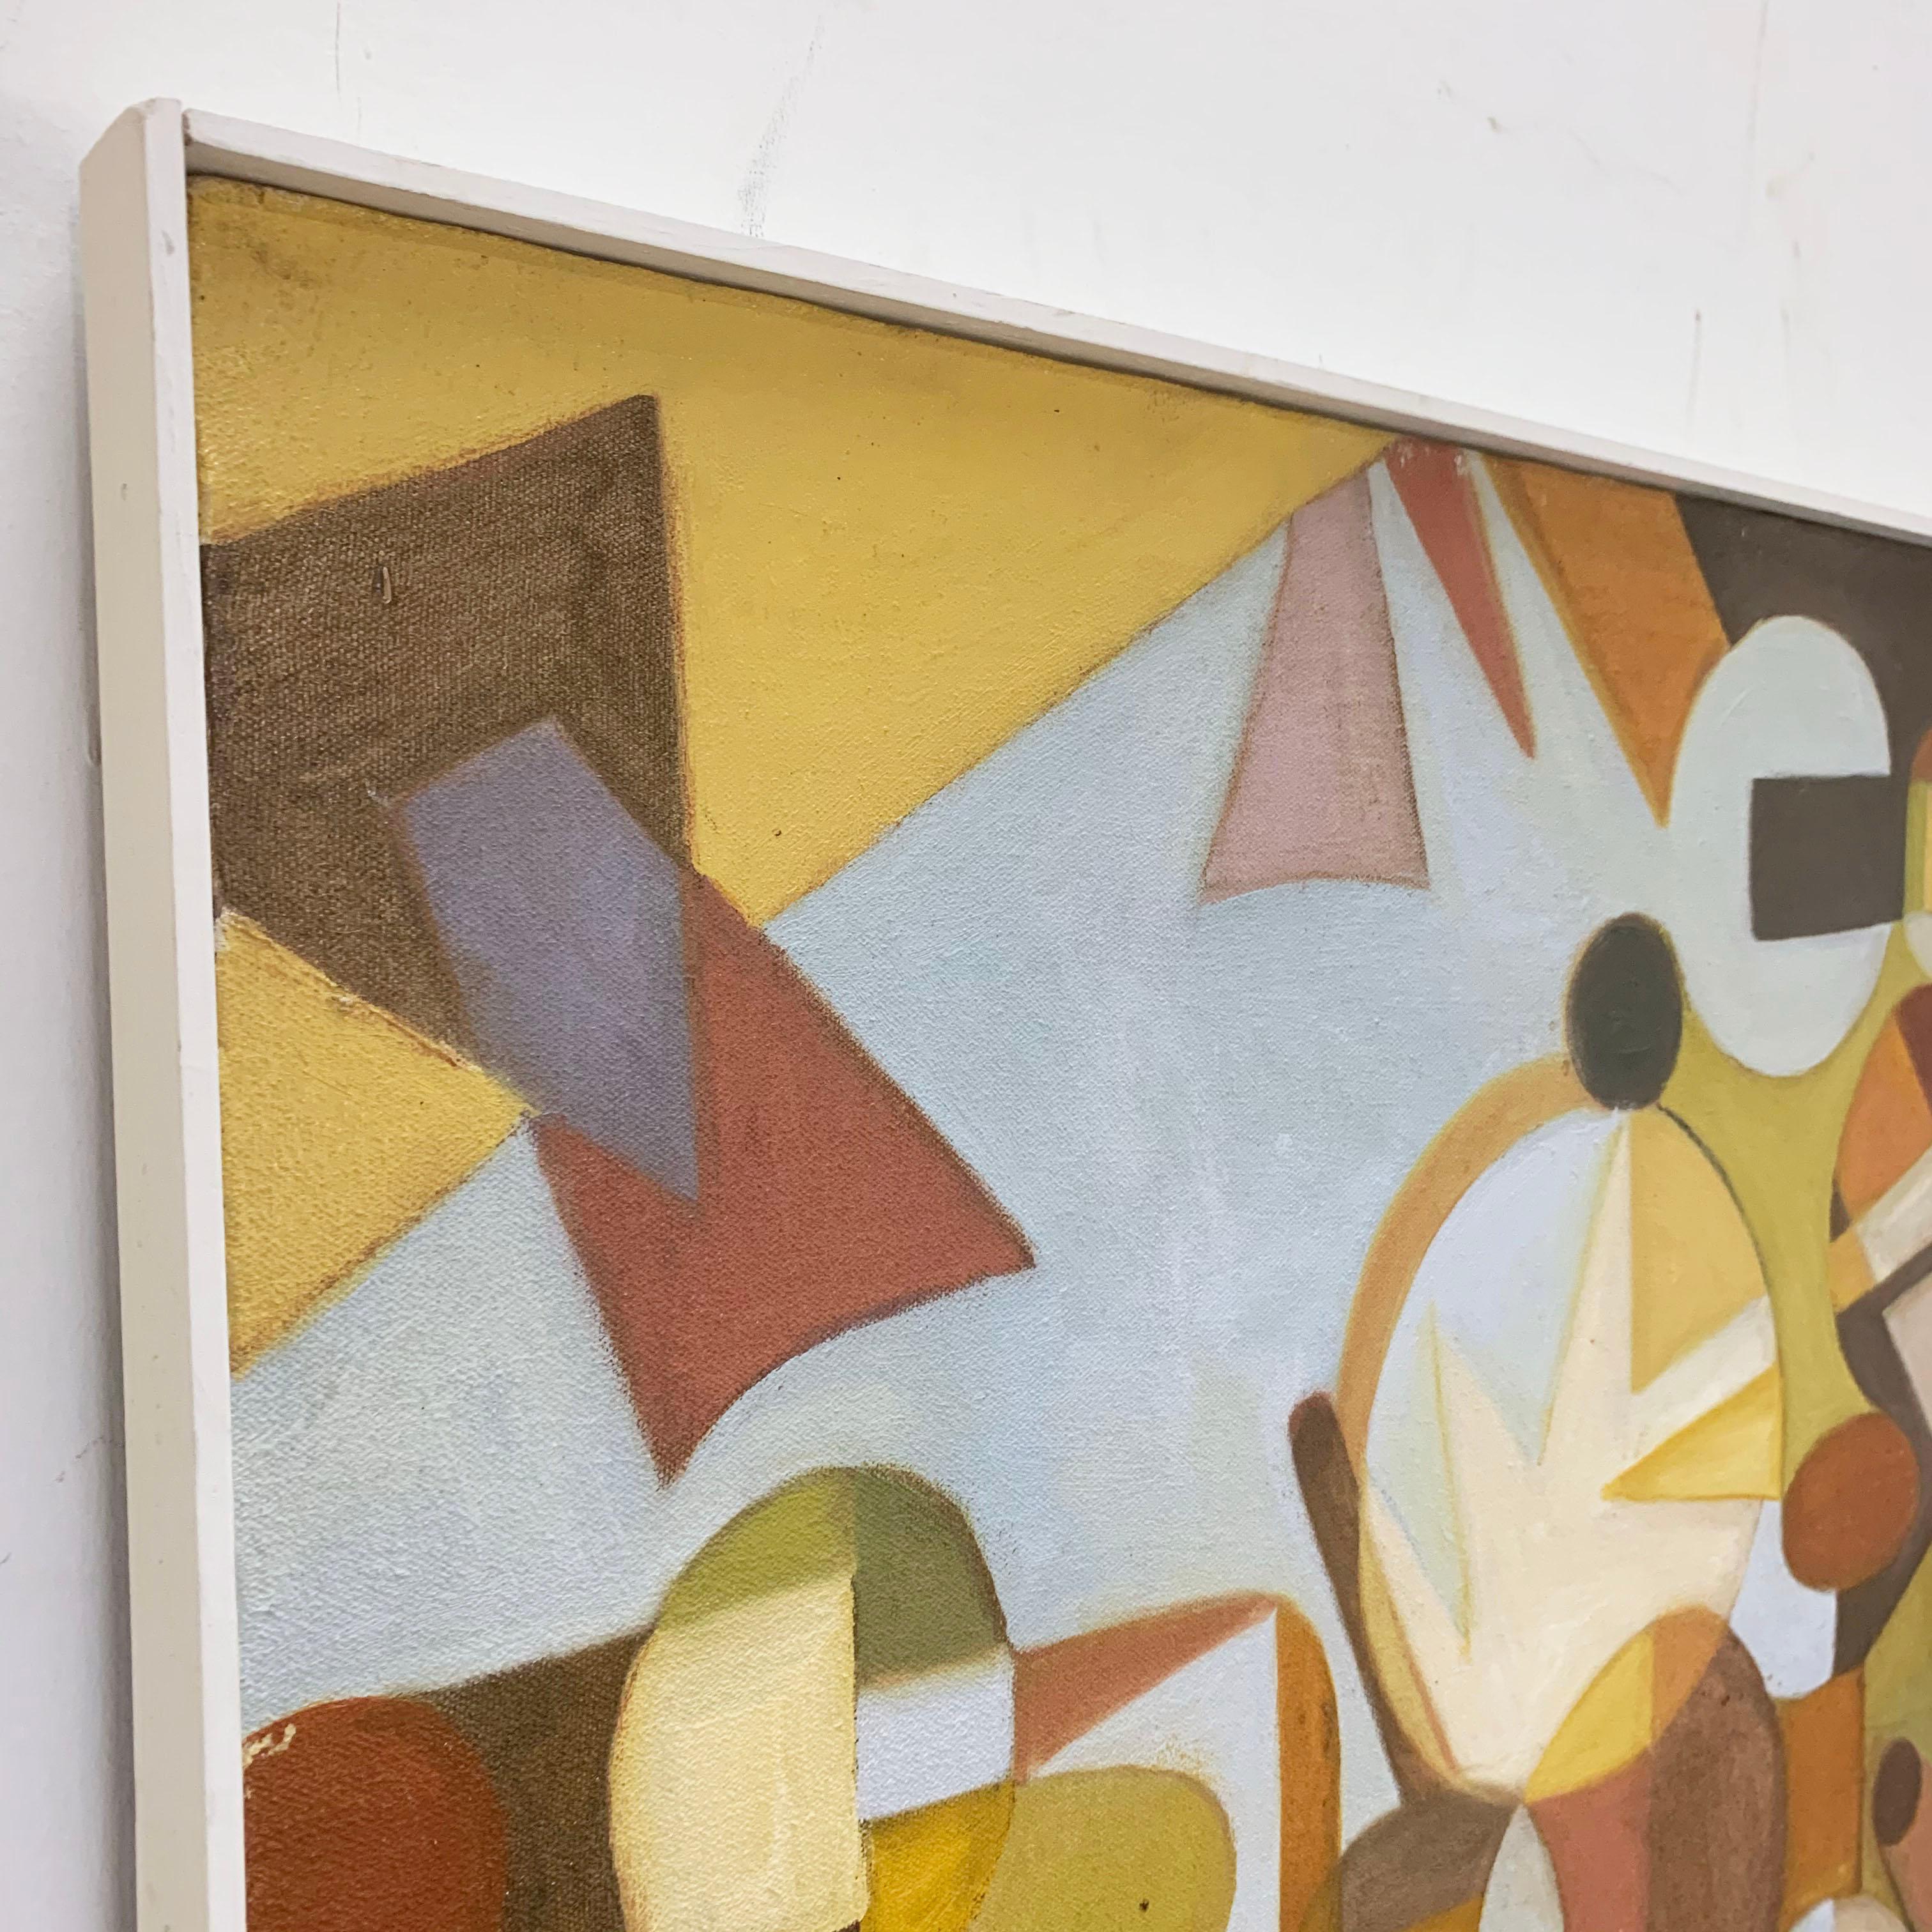 Late 20th Century Mid-Century Modernist Abstract Geometric Oil Signed Denise Schwartz, d. 1978